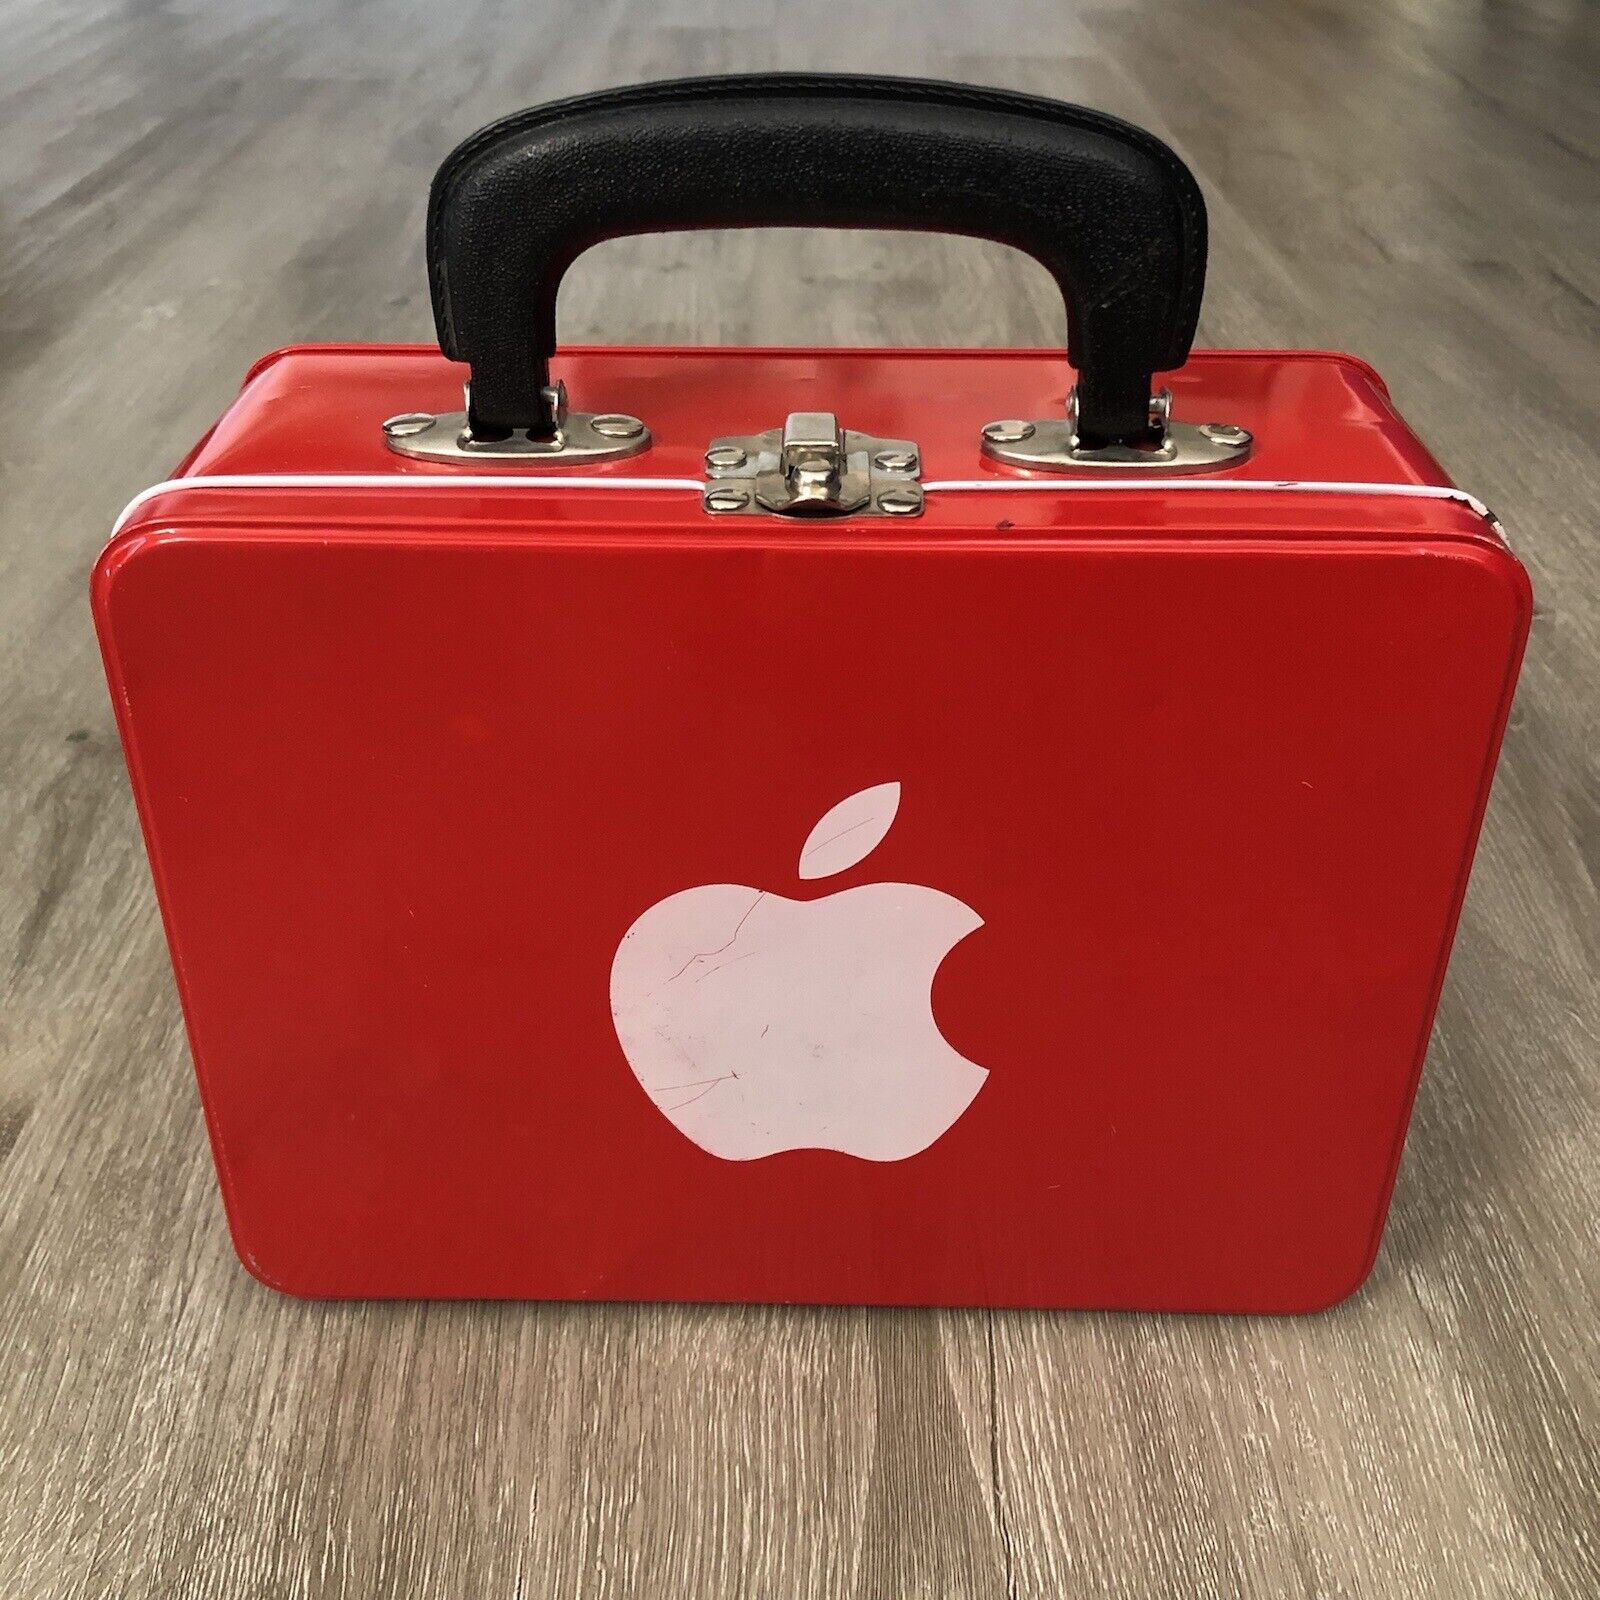 Vintage Apple Computer Lunchbox Red Tin Employee Promotional Giveaway 90s Rare